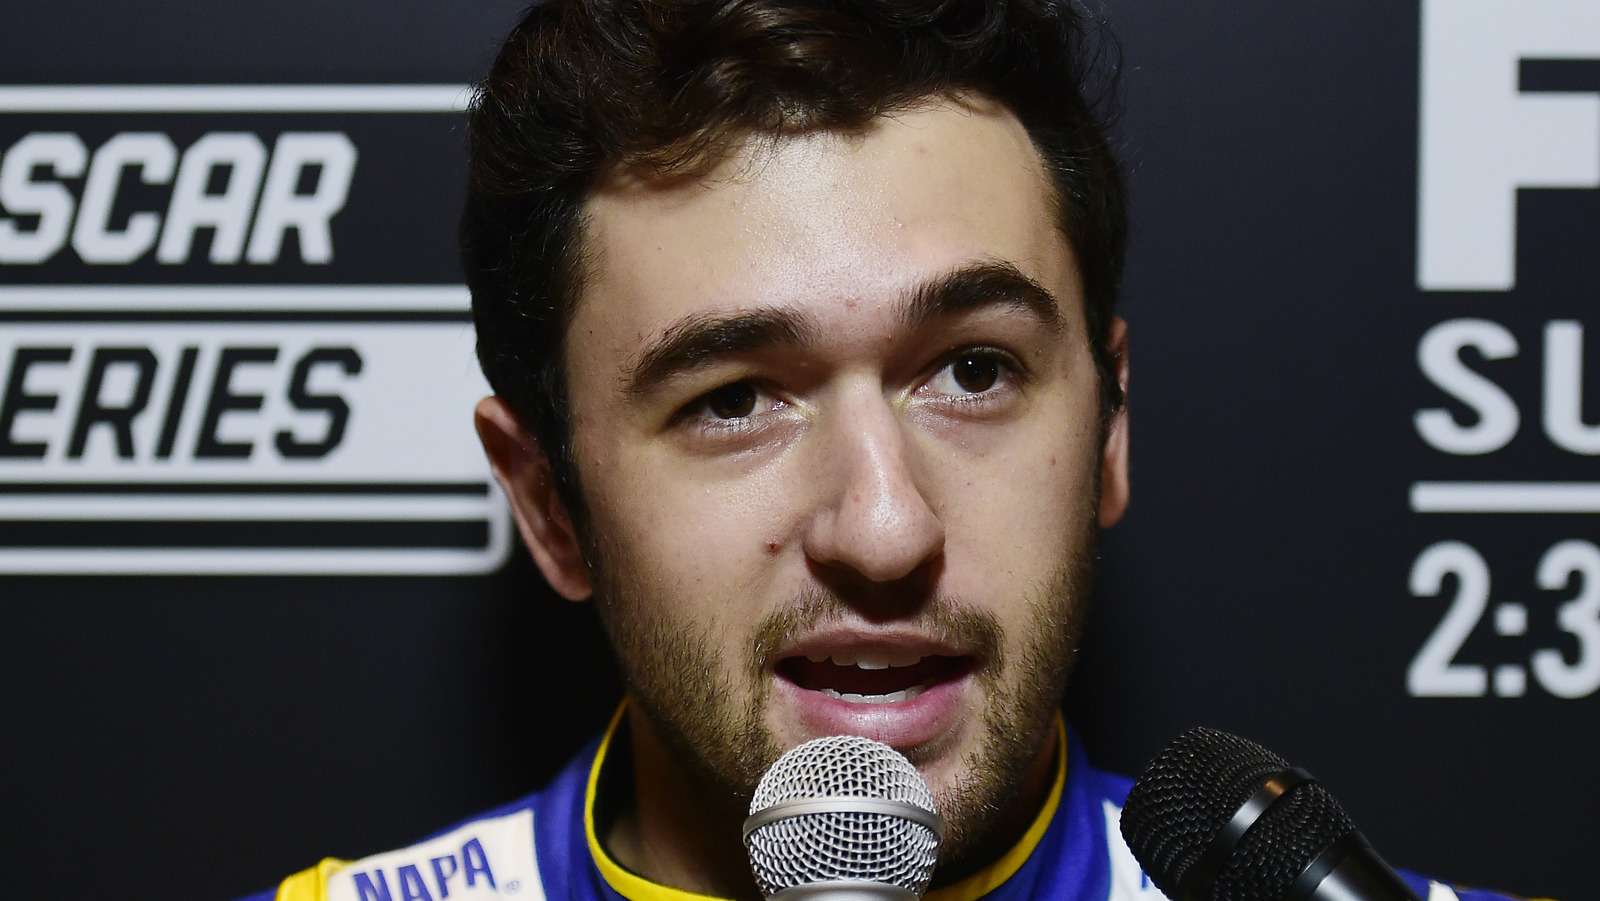 Chase Elliott's Net Worth: How Much Money Does The Nascar Star Have?